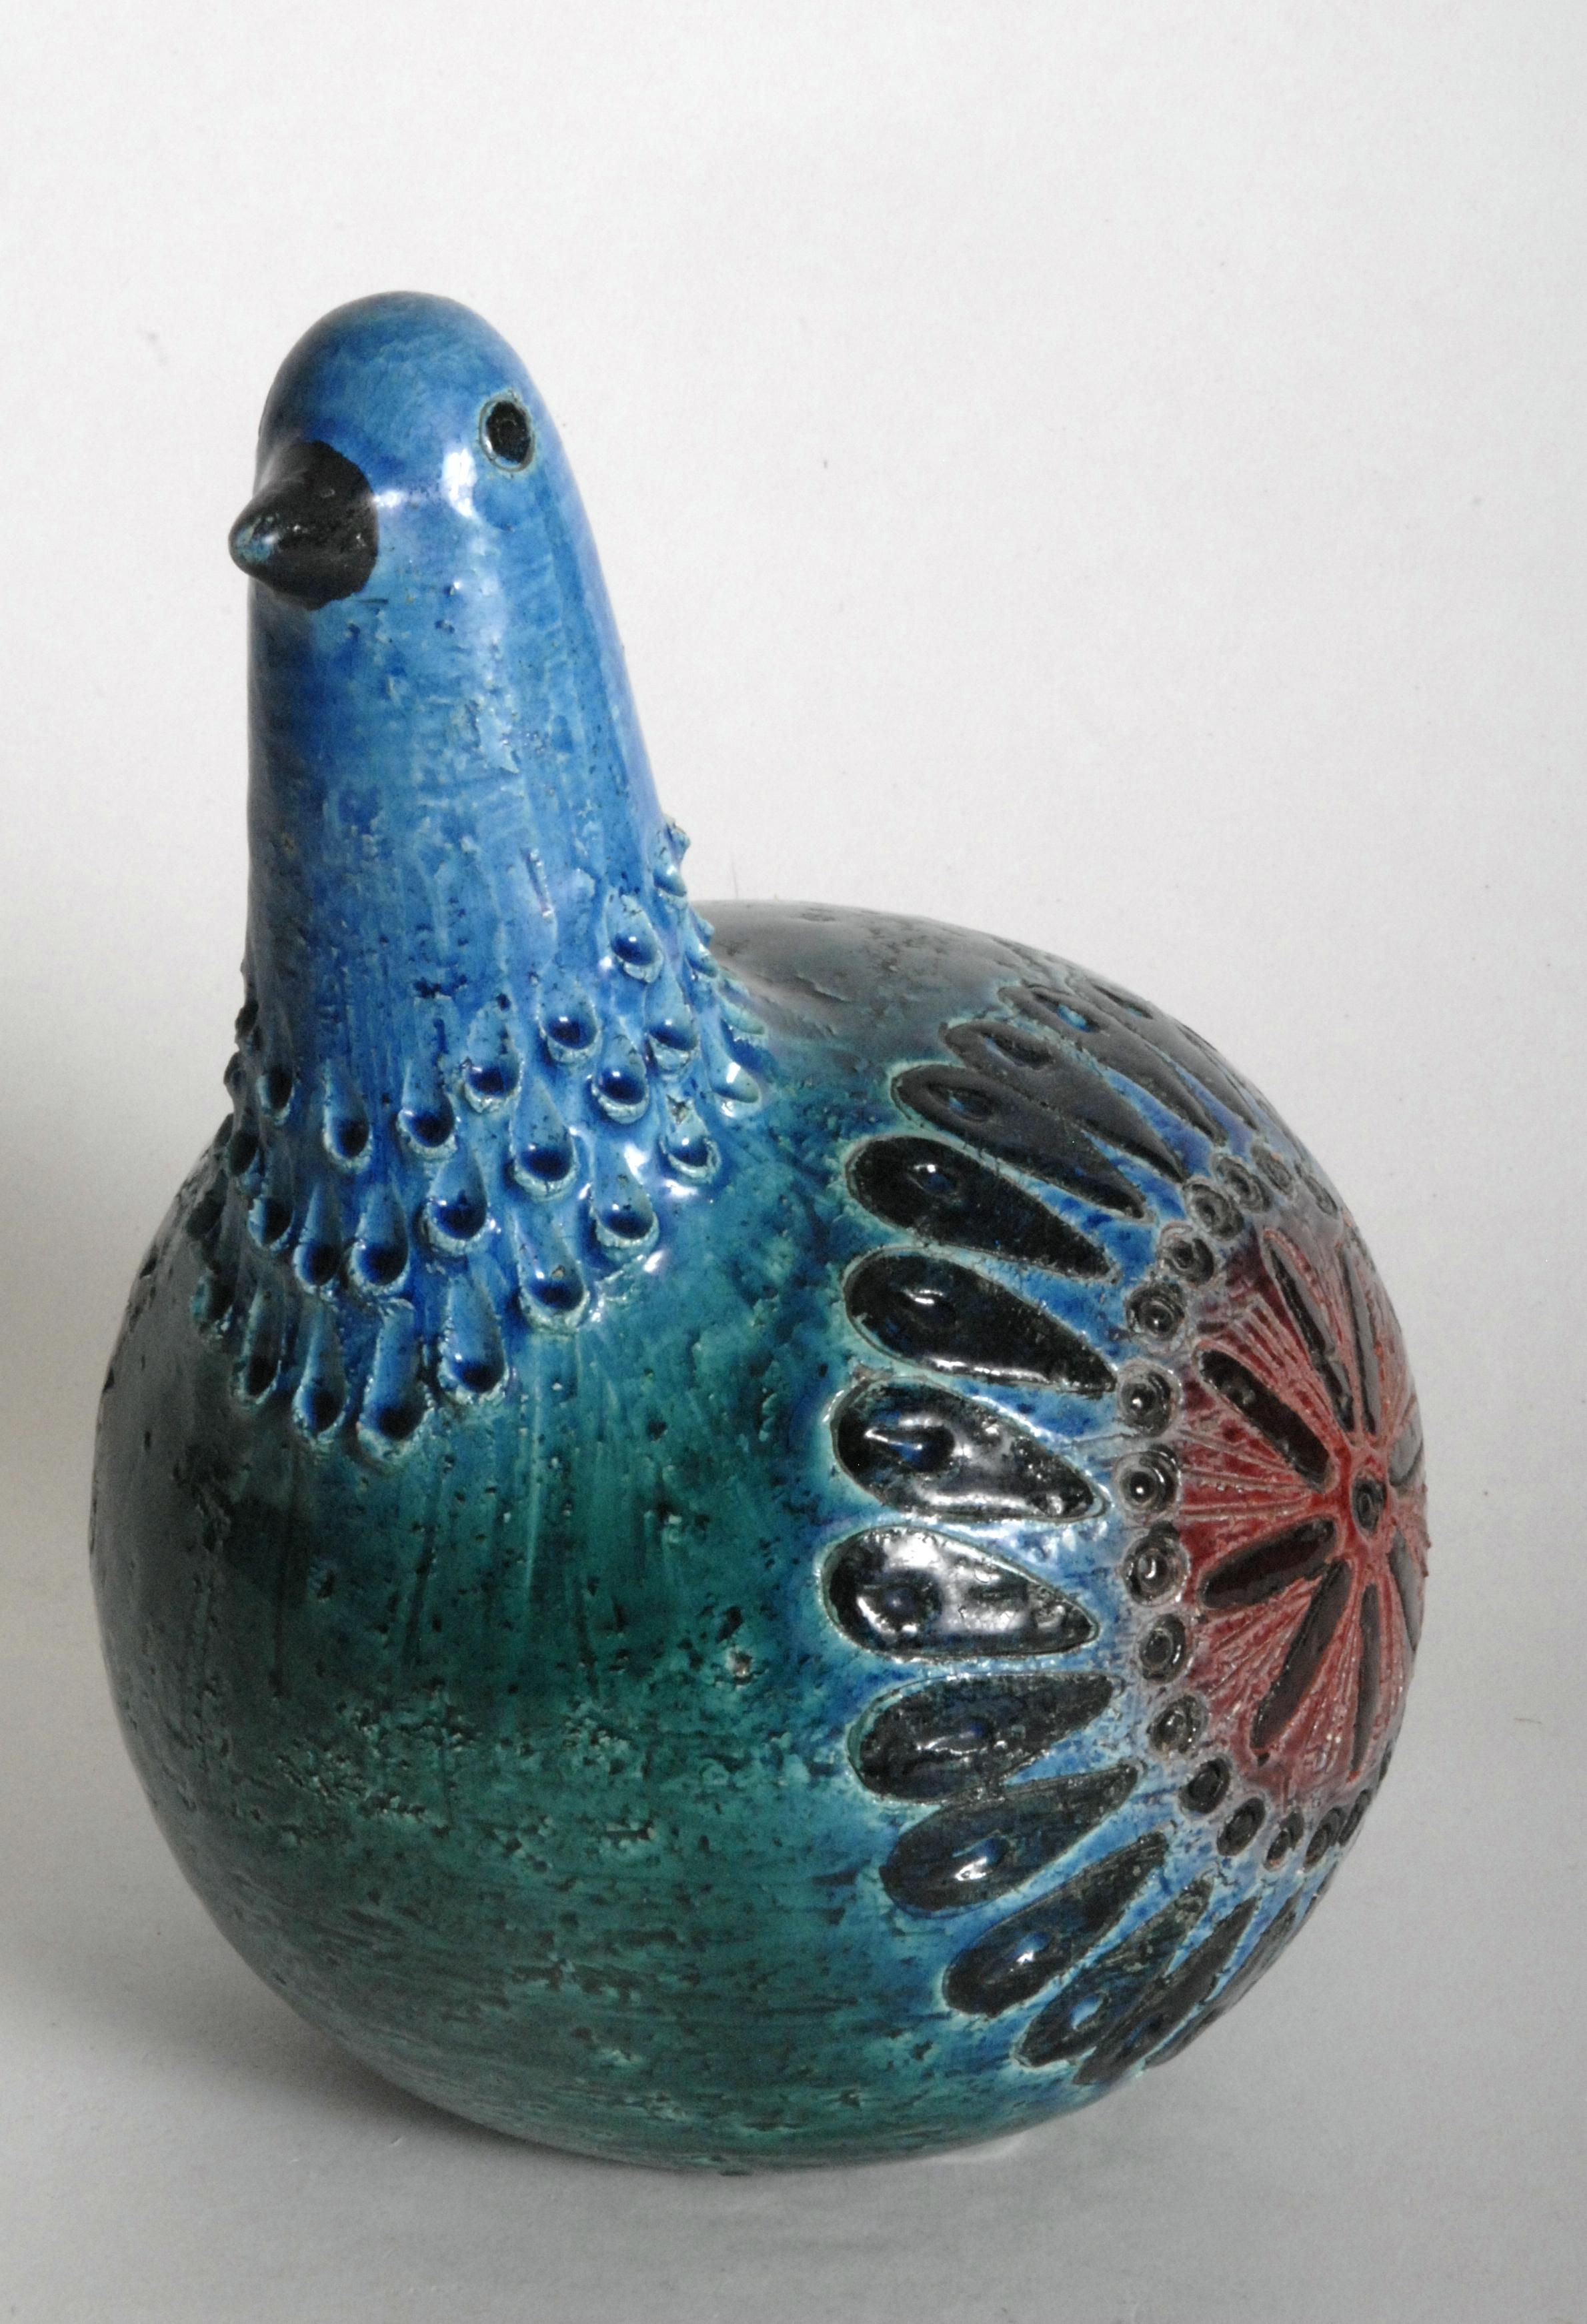 An Aldo Londi designed Gallina, [Hen] highly stylised and whimsical, this example in Kelly Green with red glazes. A scarce and collectable piece.